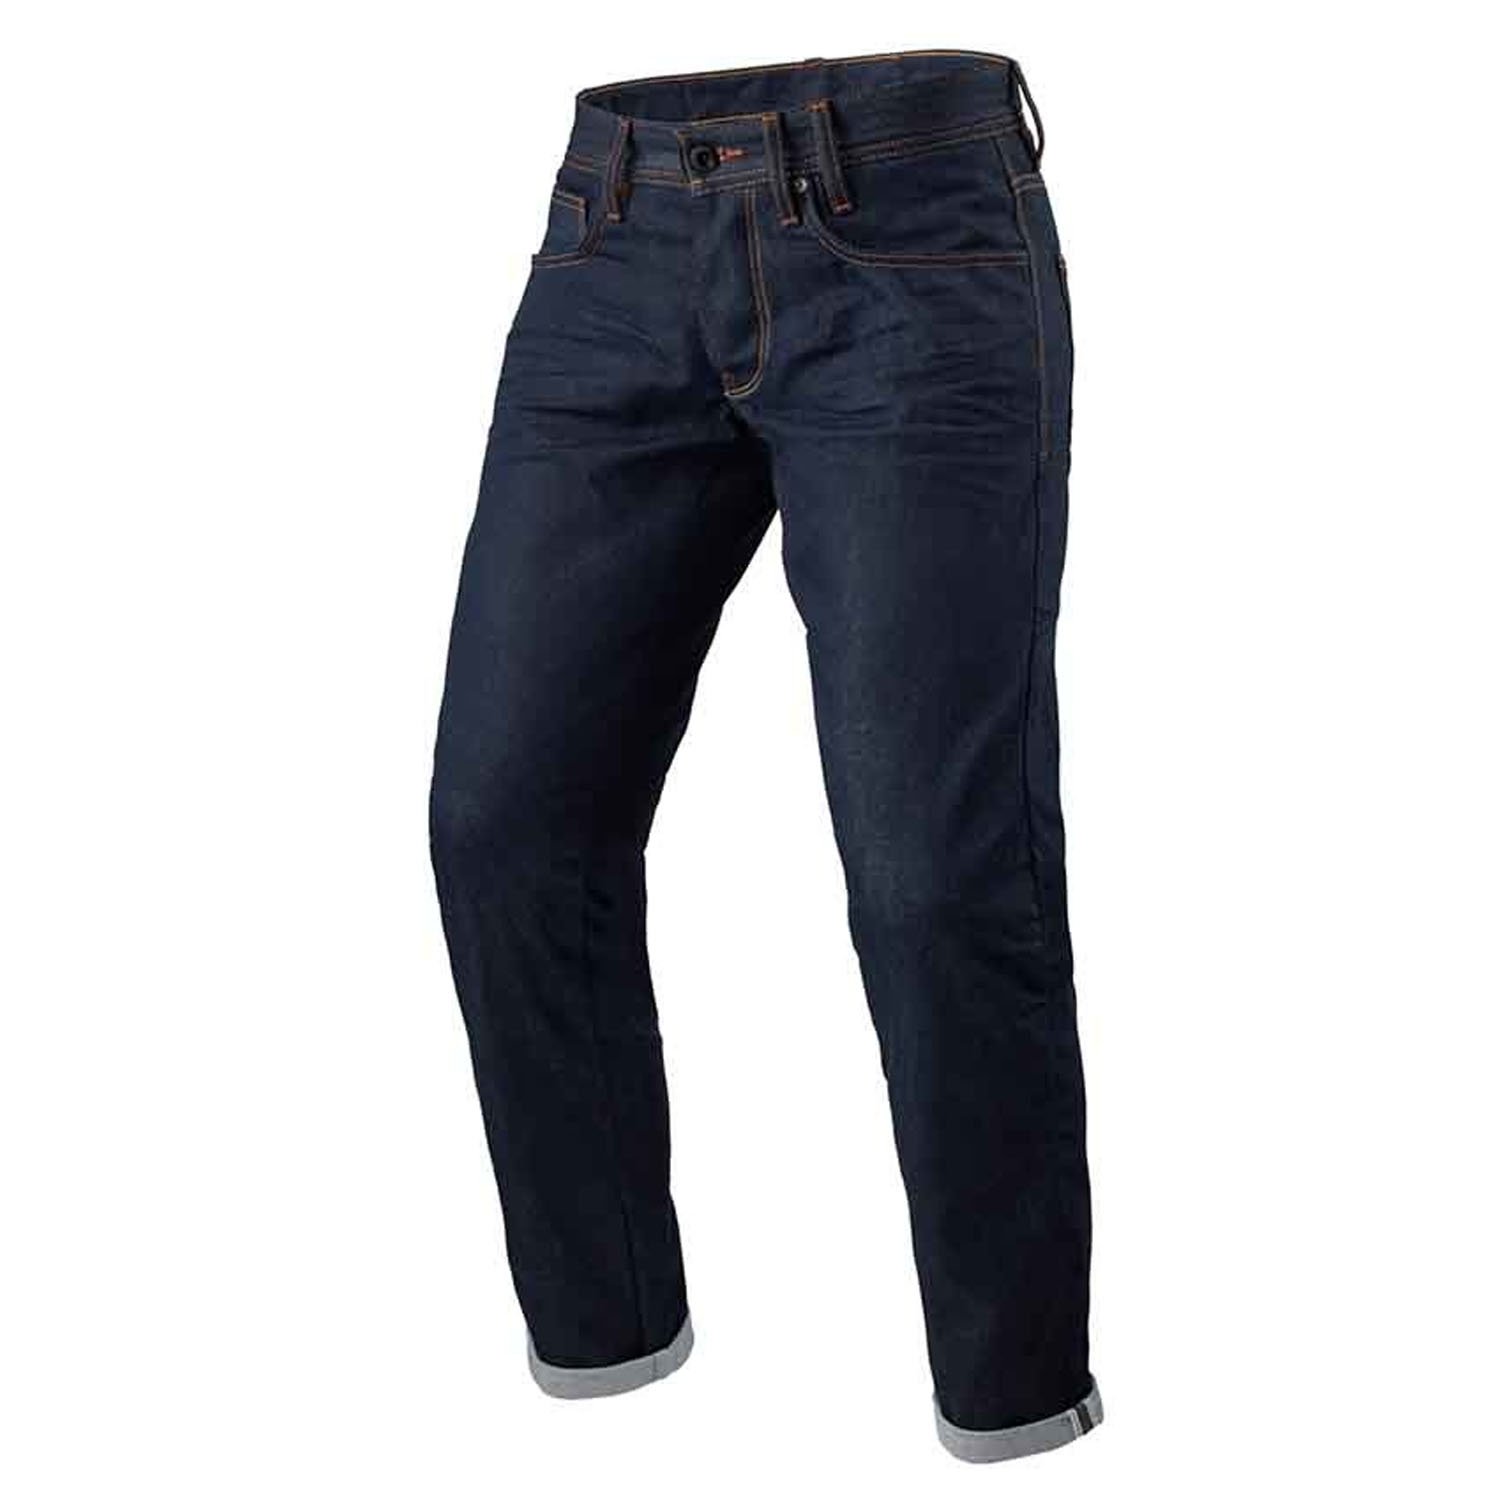 Image of REV'IT! Jeans Lewis Selvedge TF Dark Blue L36 Motorcycle Pants Taille L36/W30